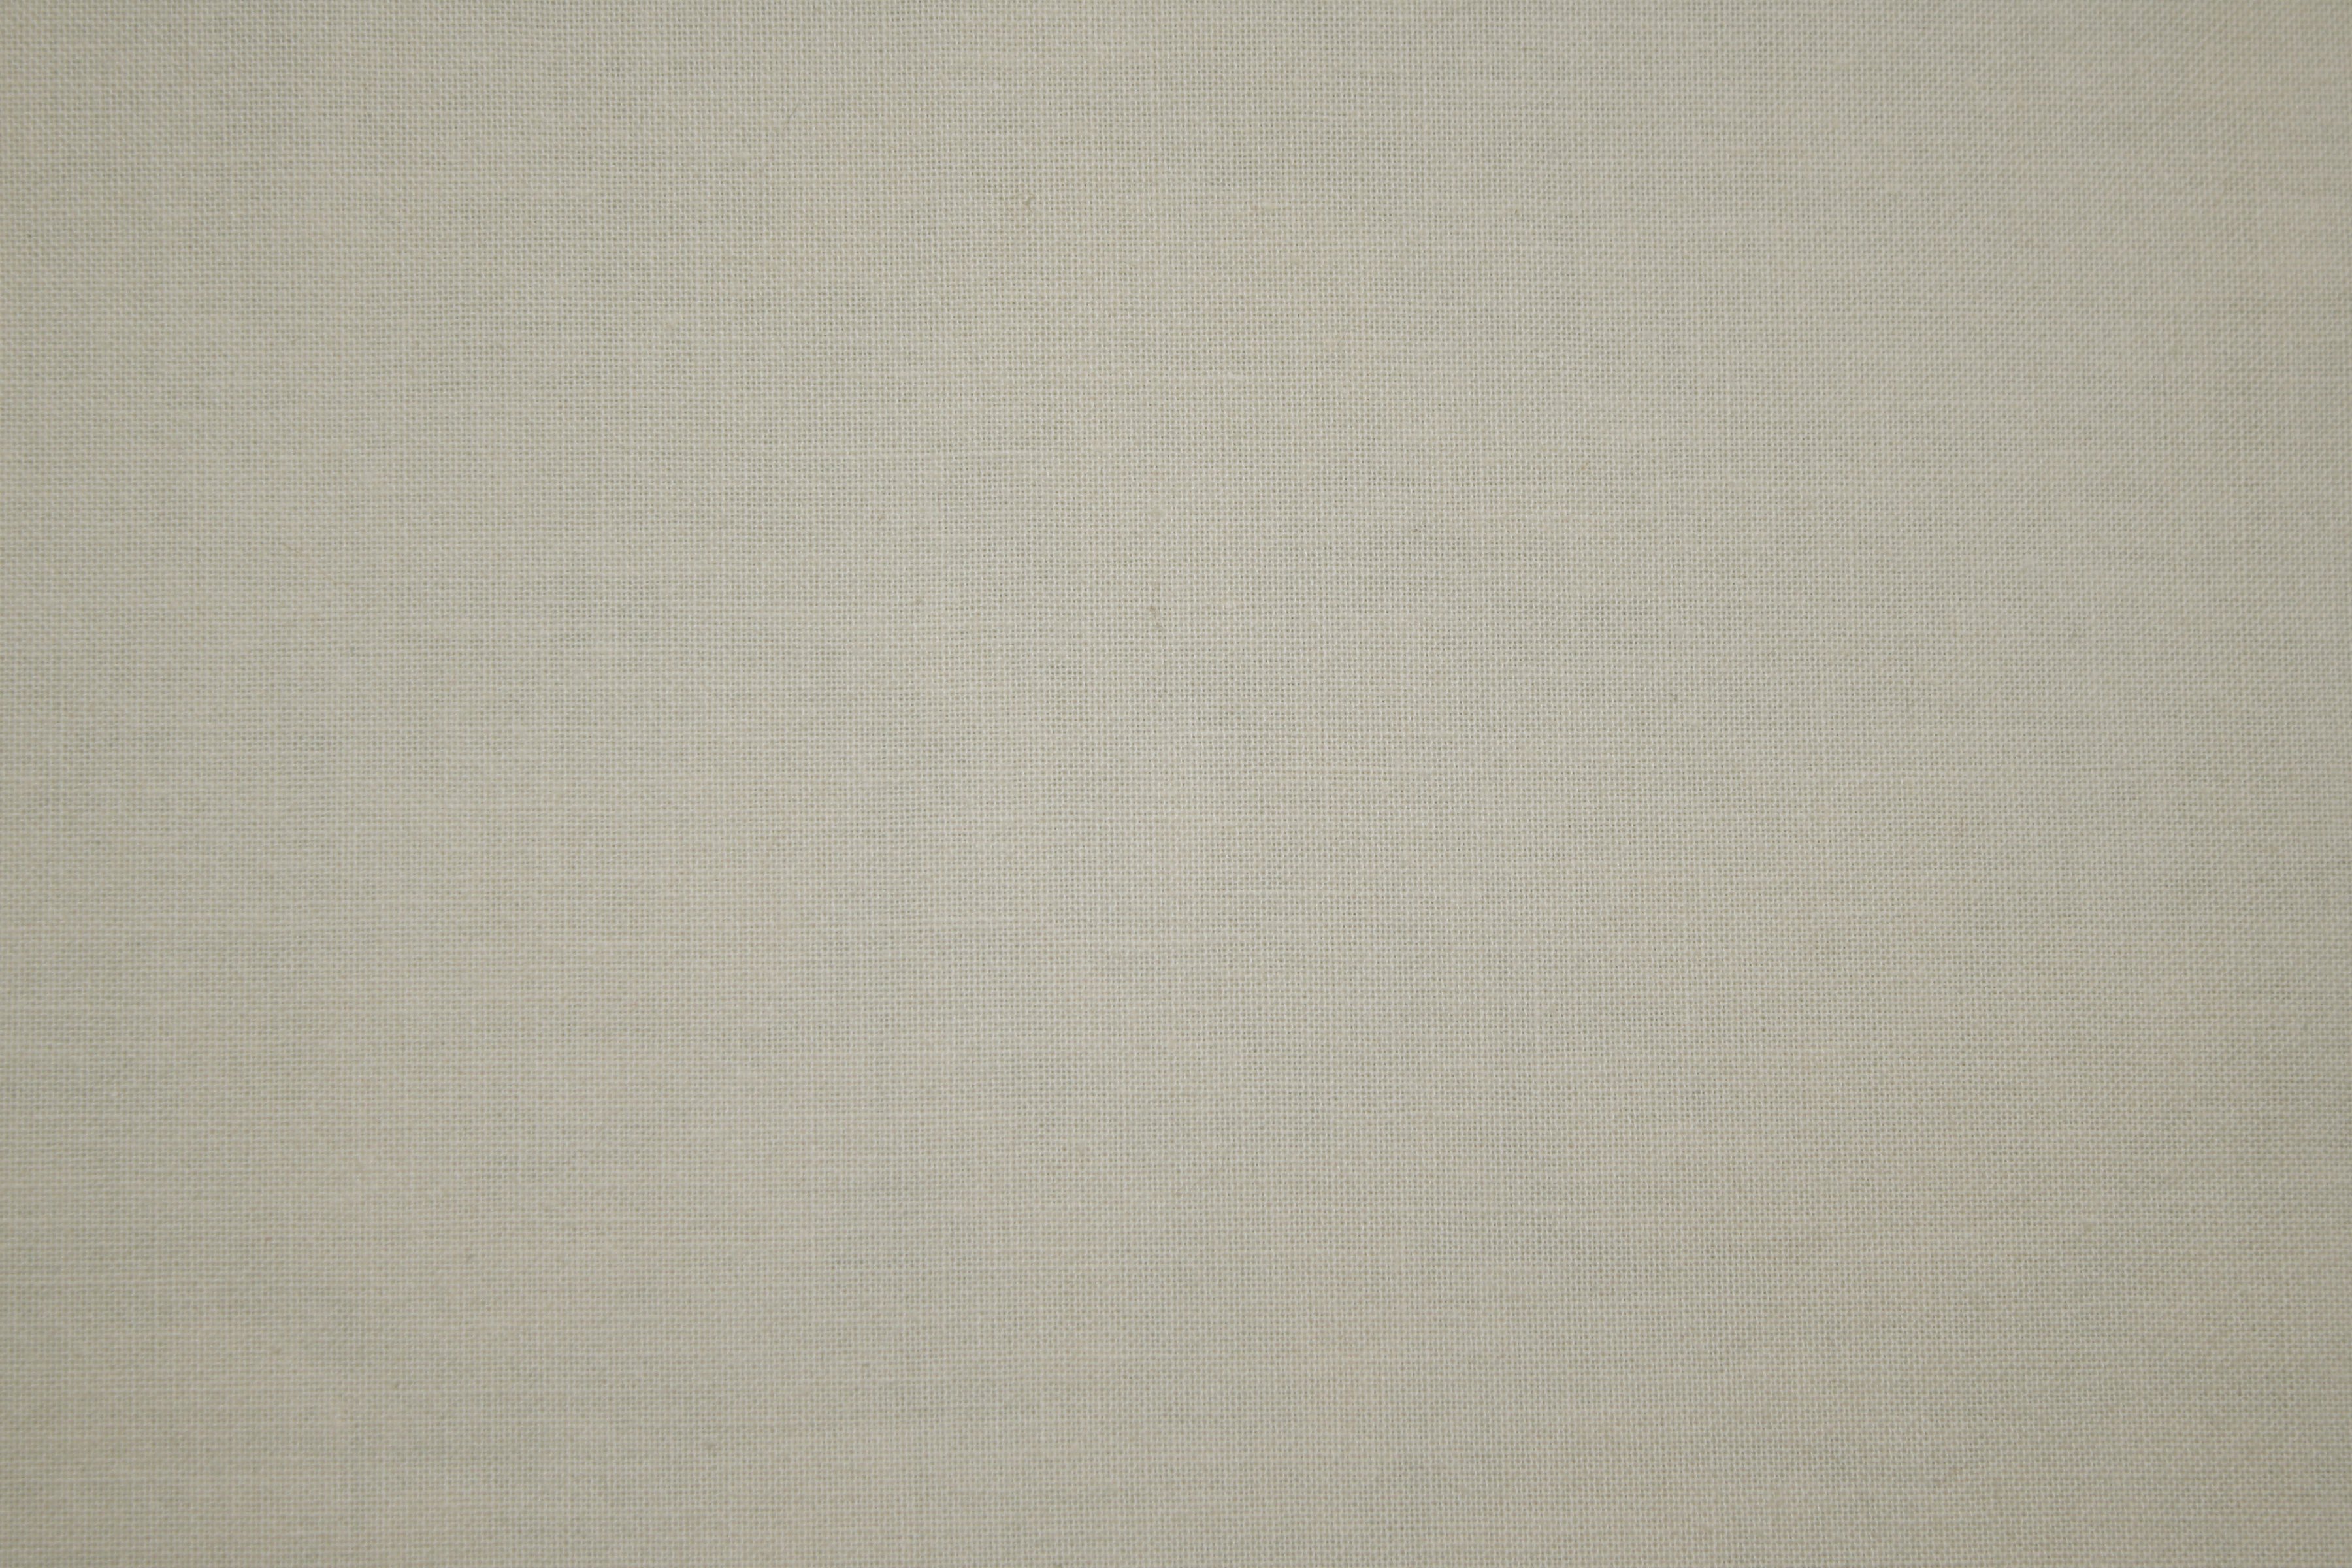 Off White or Ivory Colored Canvas Fabric Texture Picture | Free Photograph  | Photos Public Domain